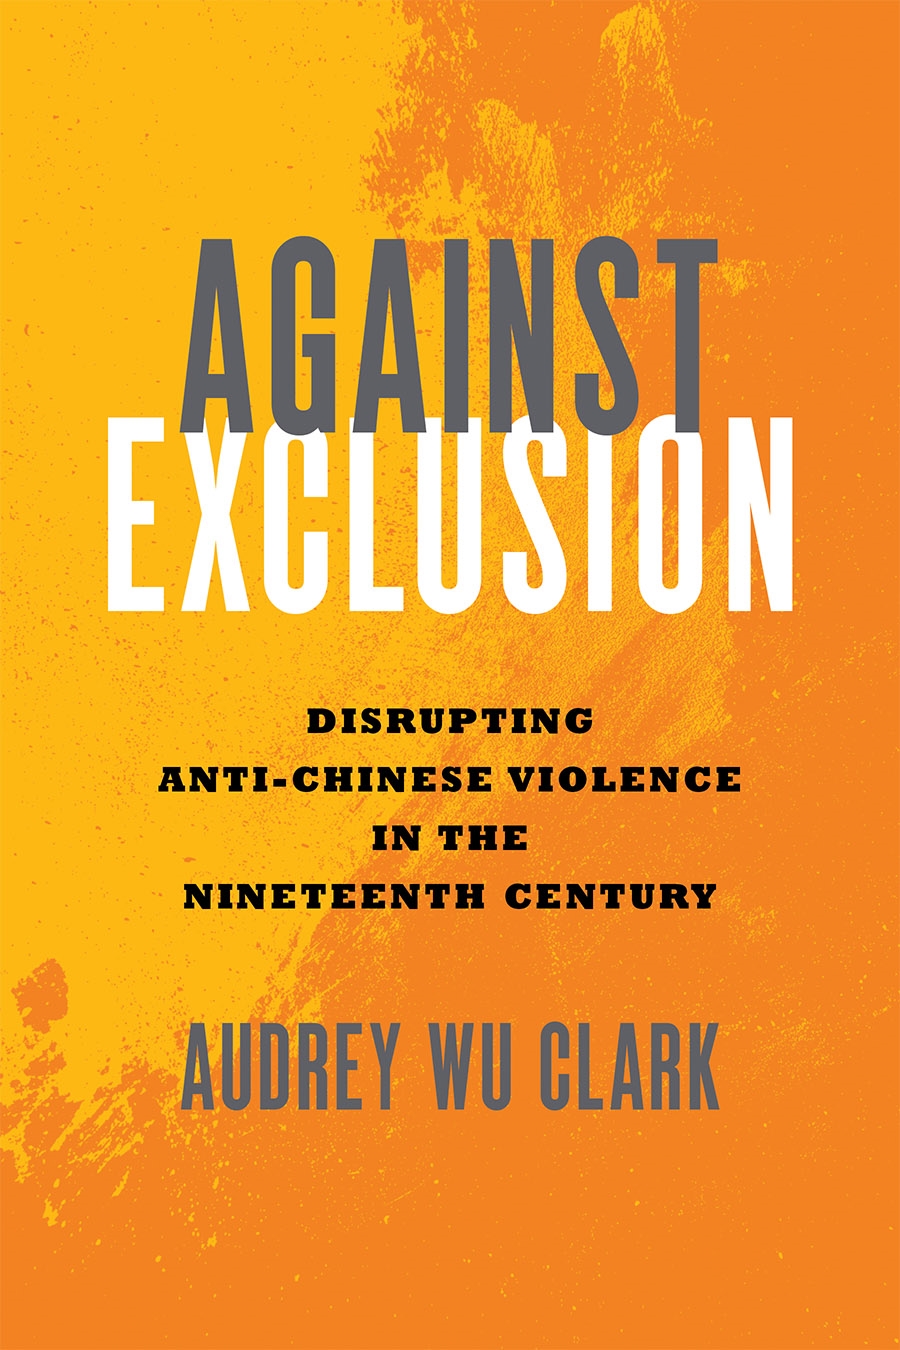 Against Exclusion: Disrupting Anti-Chinese Violence in the Nineteenth Century book cover